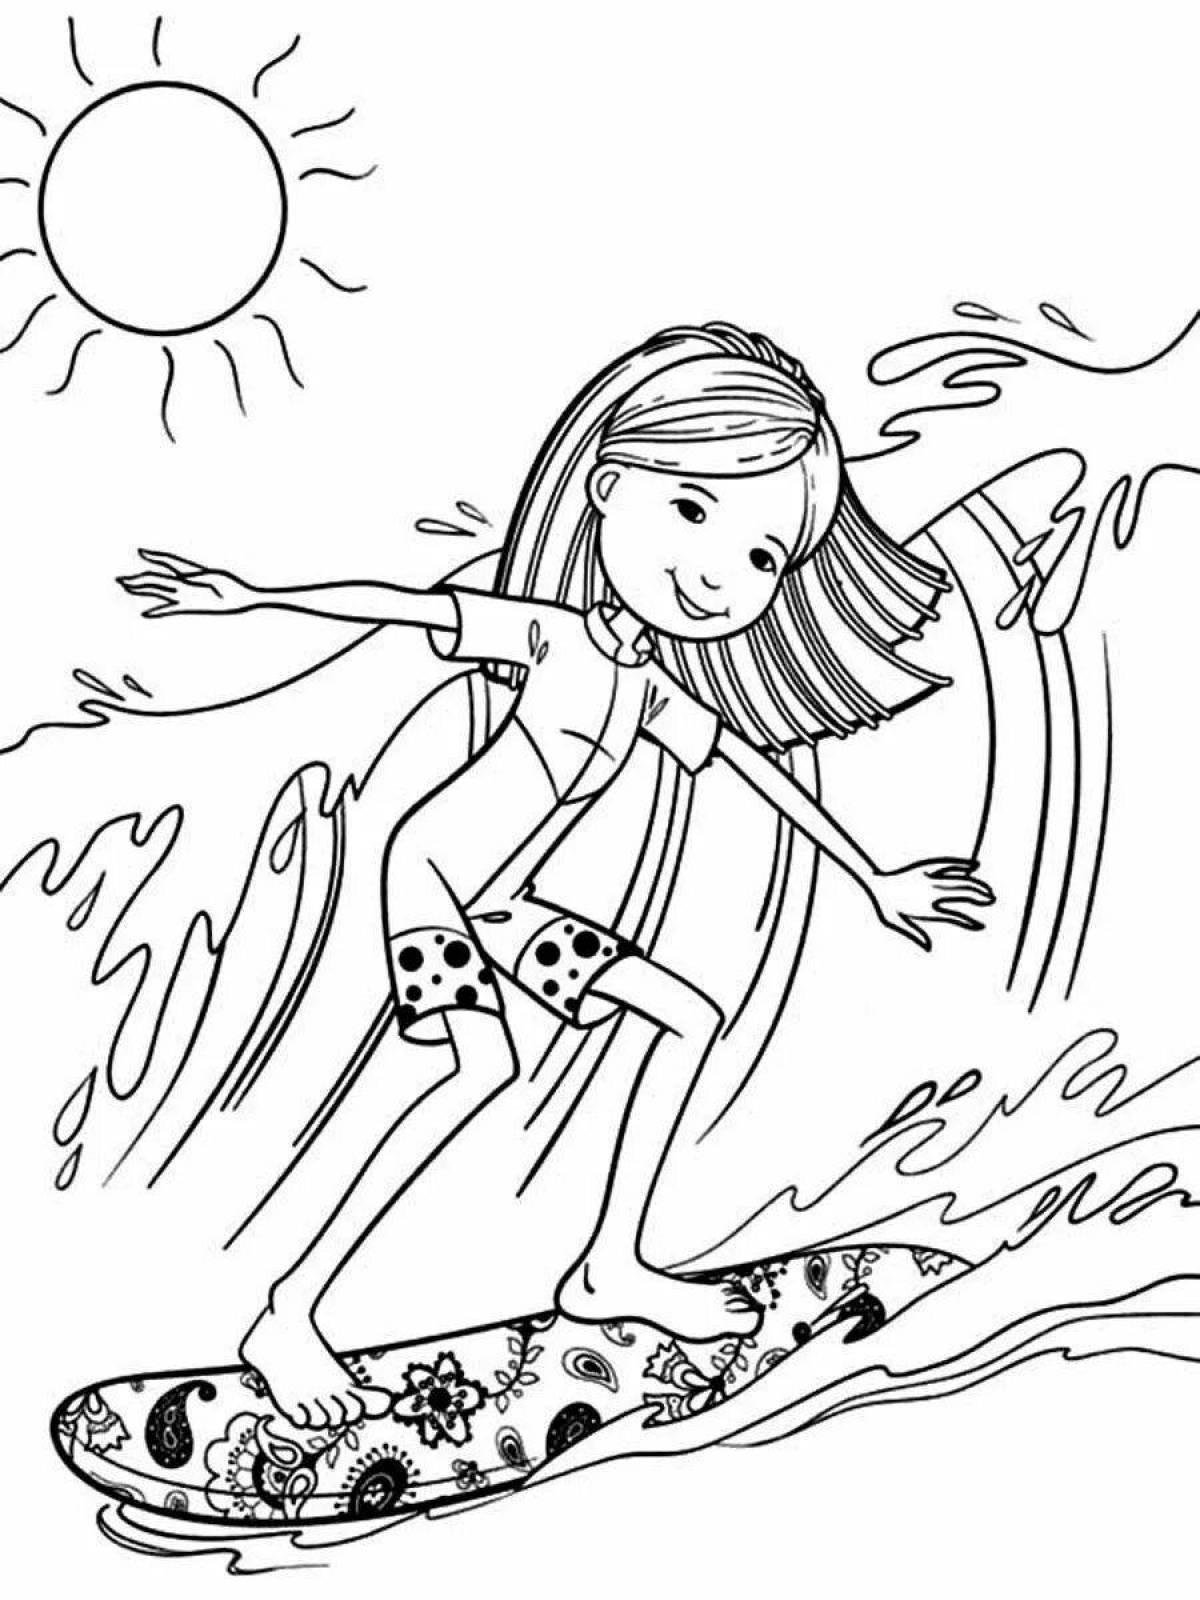 Exciting surf coloring page